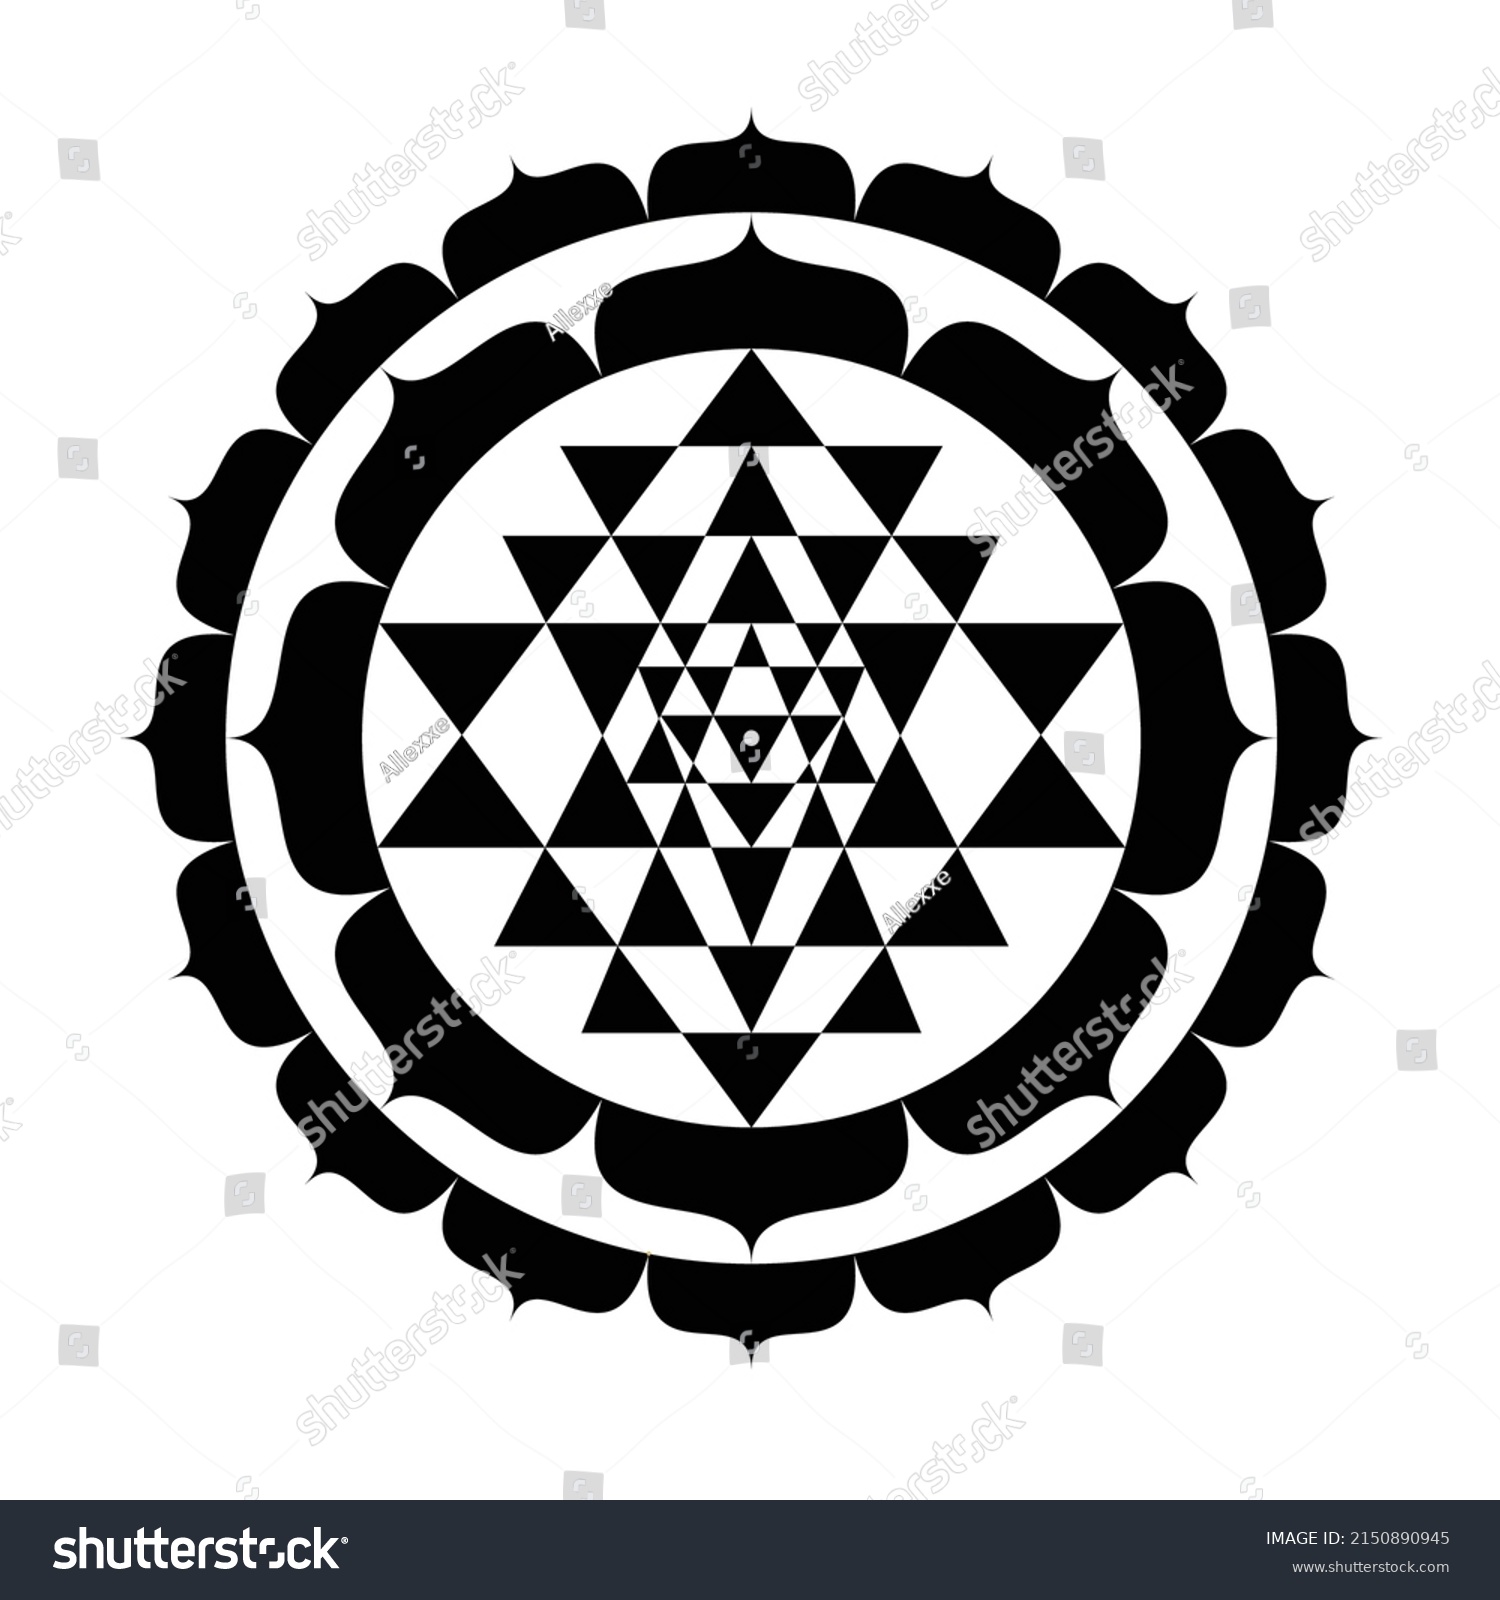 SVG of Shri Yantra nice triangles, lotus black mystical diagram the “queen of yantras”, isolated on white background. Sri Yantra forms a unity between the divine masculine and divine feminine. svg